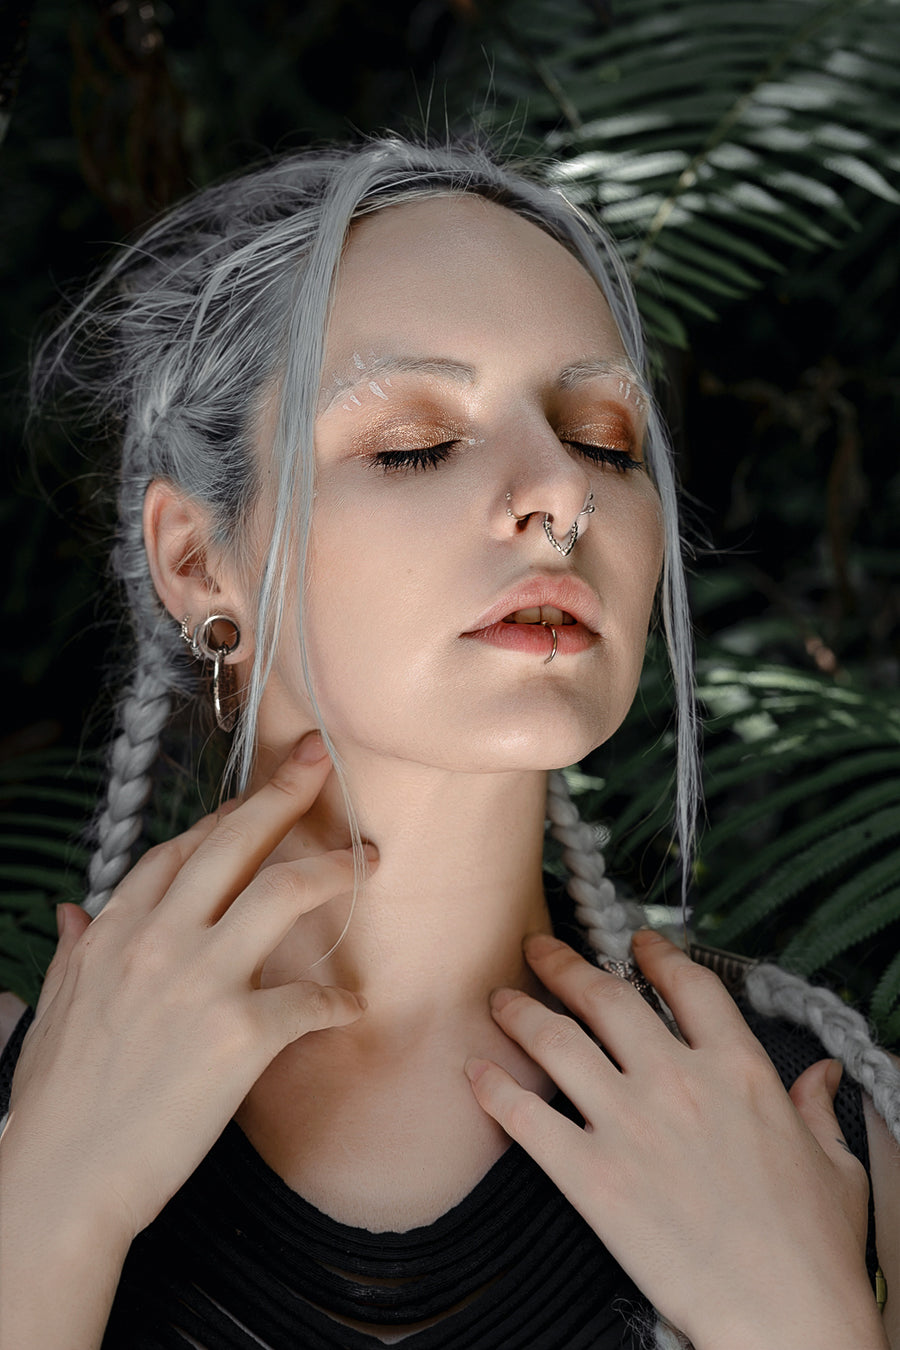 Portrait of a serene woman with striking silver braided hair and multiple piercings, including a septum and lip ring, against a lush green foliage background, evoking a connection with nature and self-expression through body art.